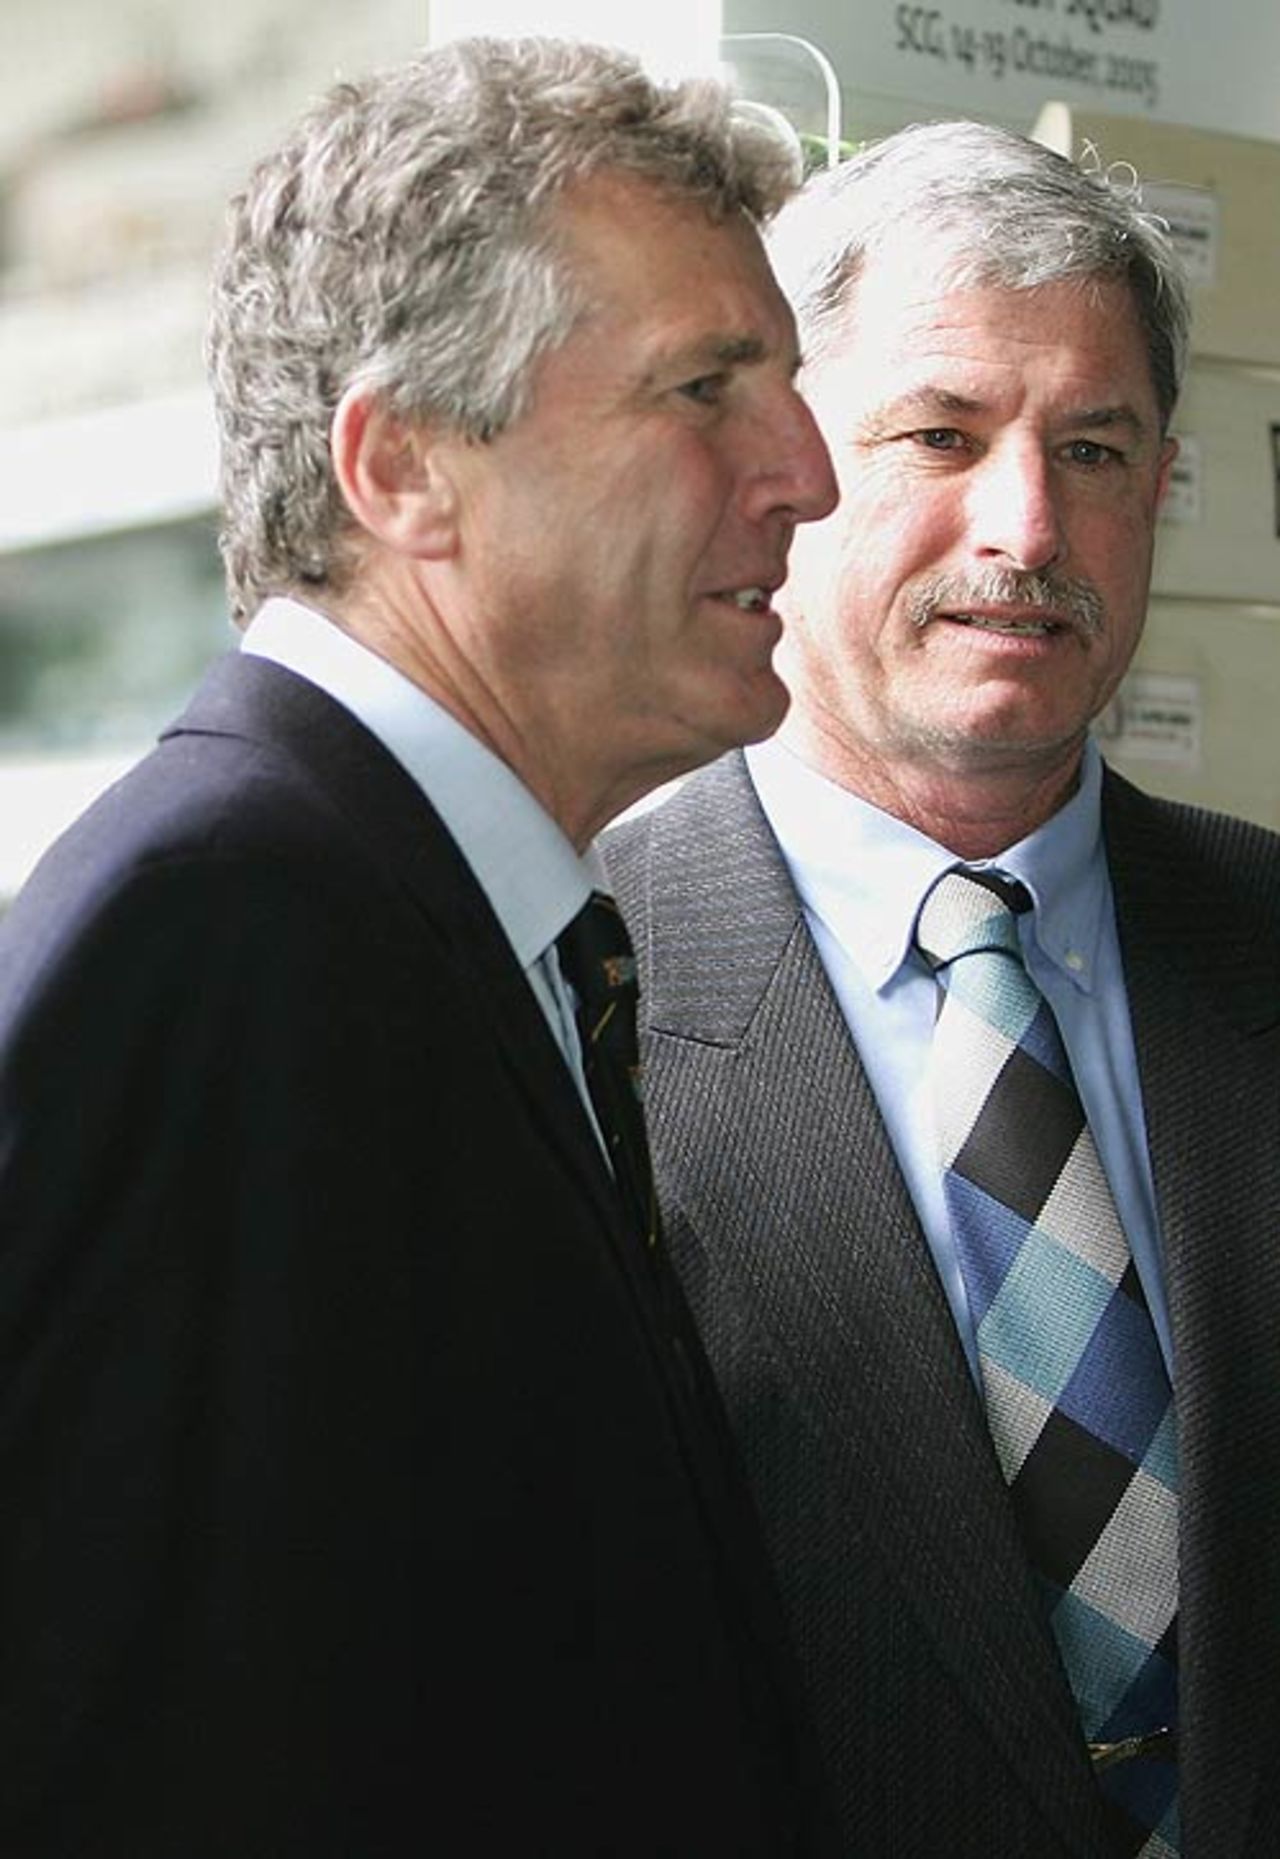 John Wright and Richard Hadlee at the announcing of the World XI teams, Melbourne, August 23, 2005